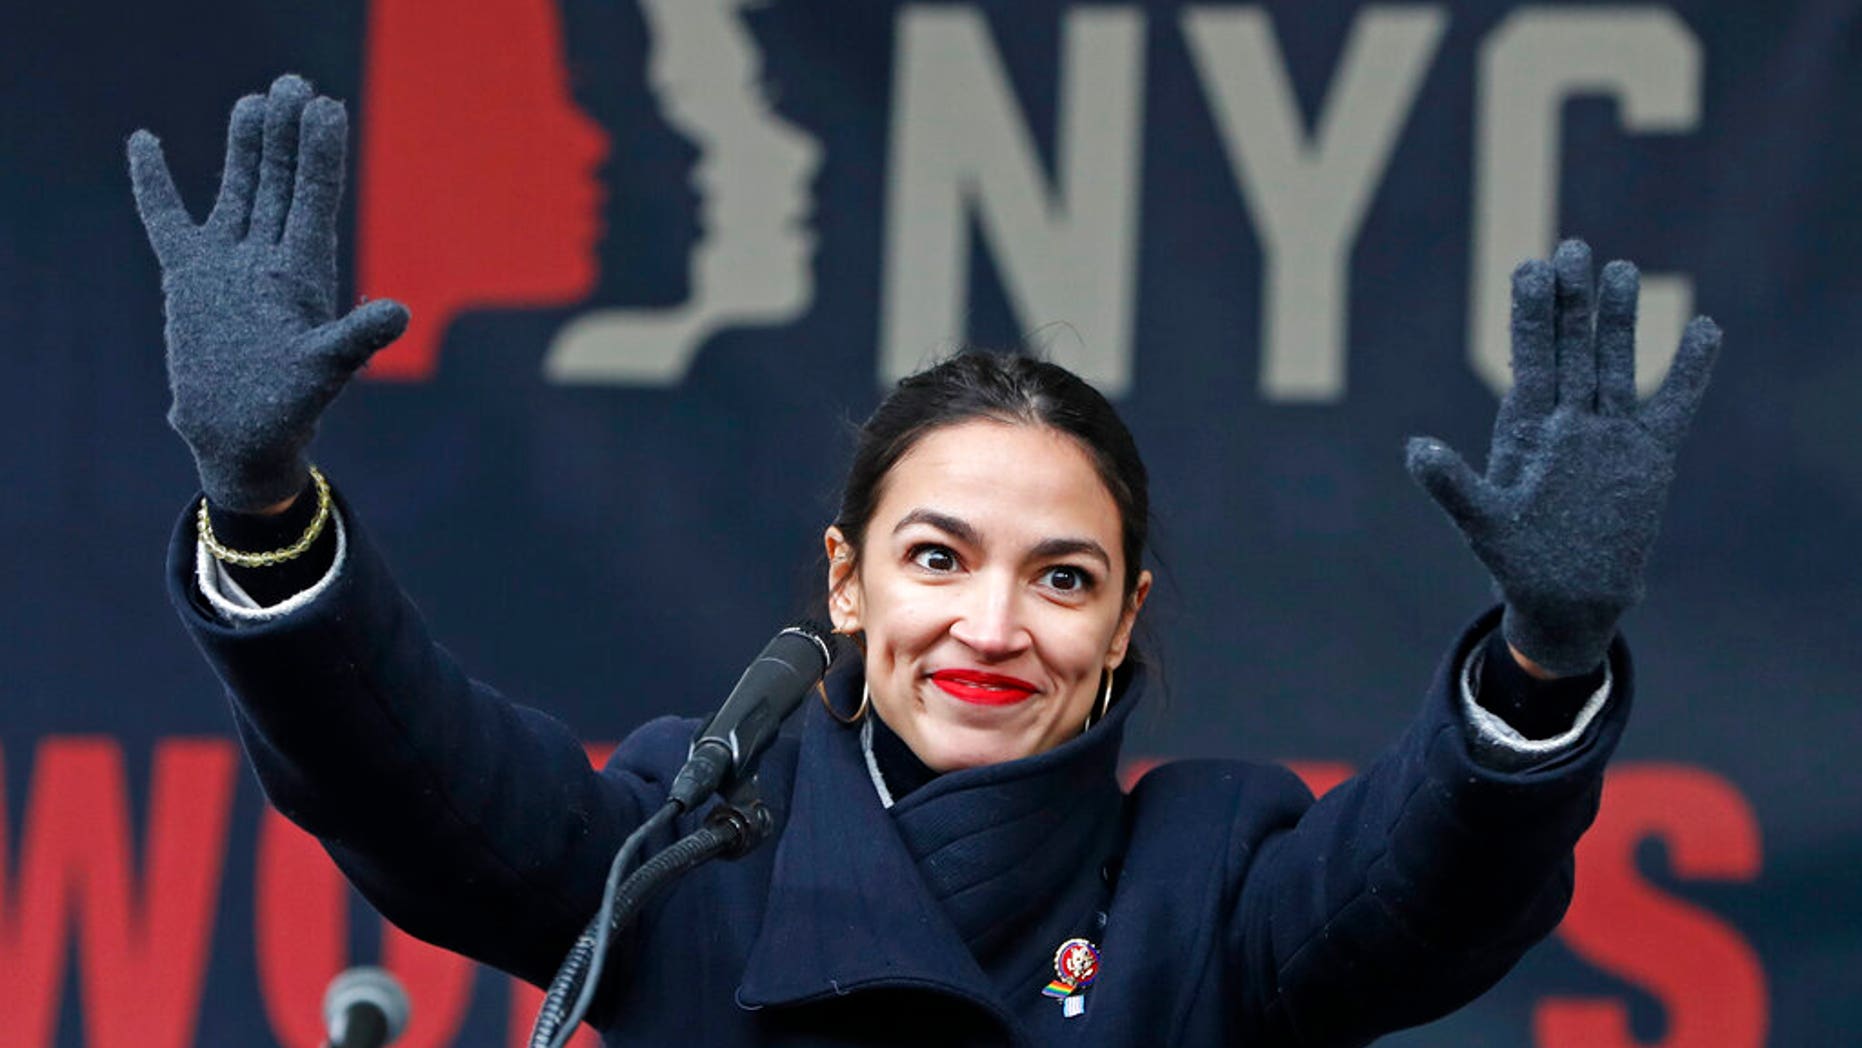 Ocasio-Cortez agrees that a world that allows for billionaires is immoral